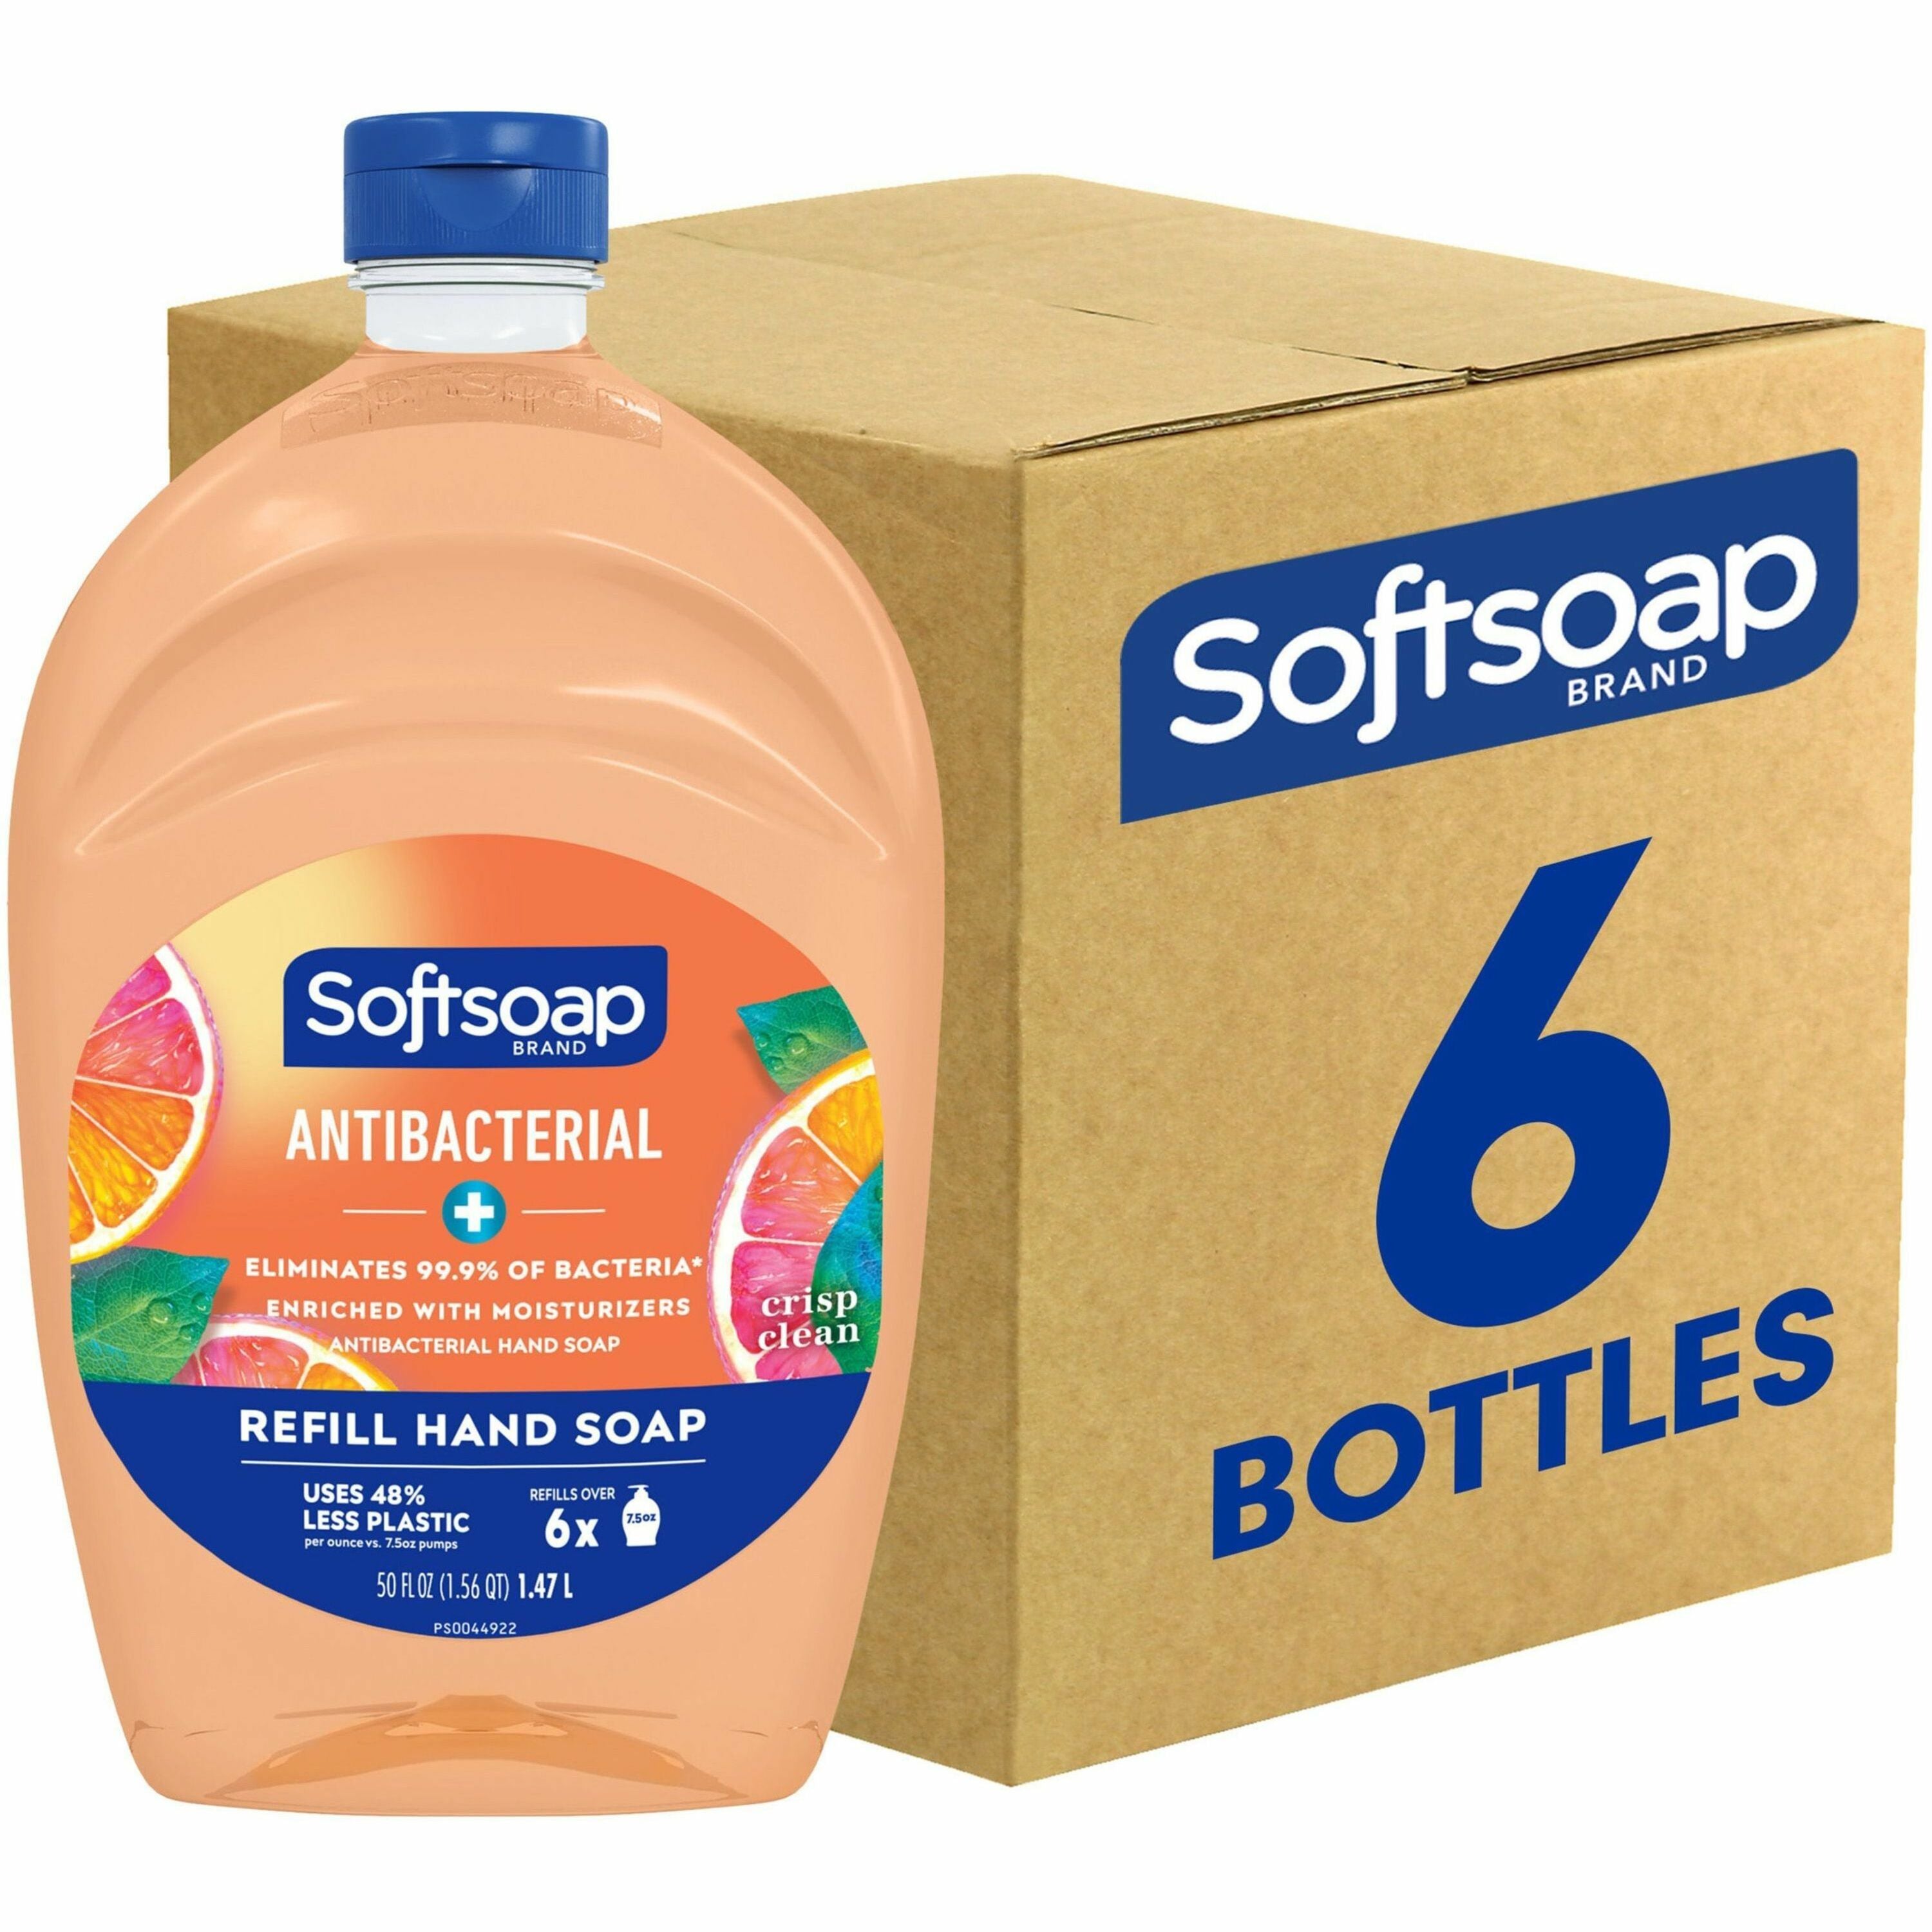 softsoap-antibacterial-hand-soap_cpcus05261act - 1